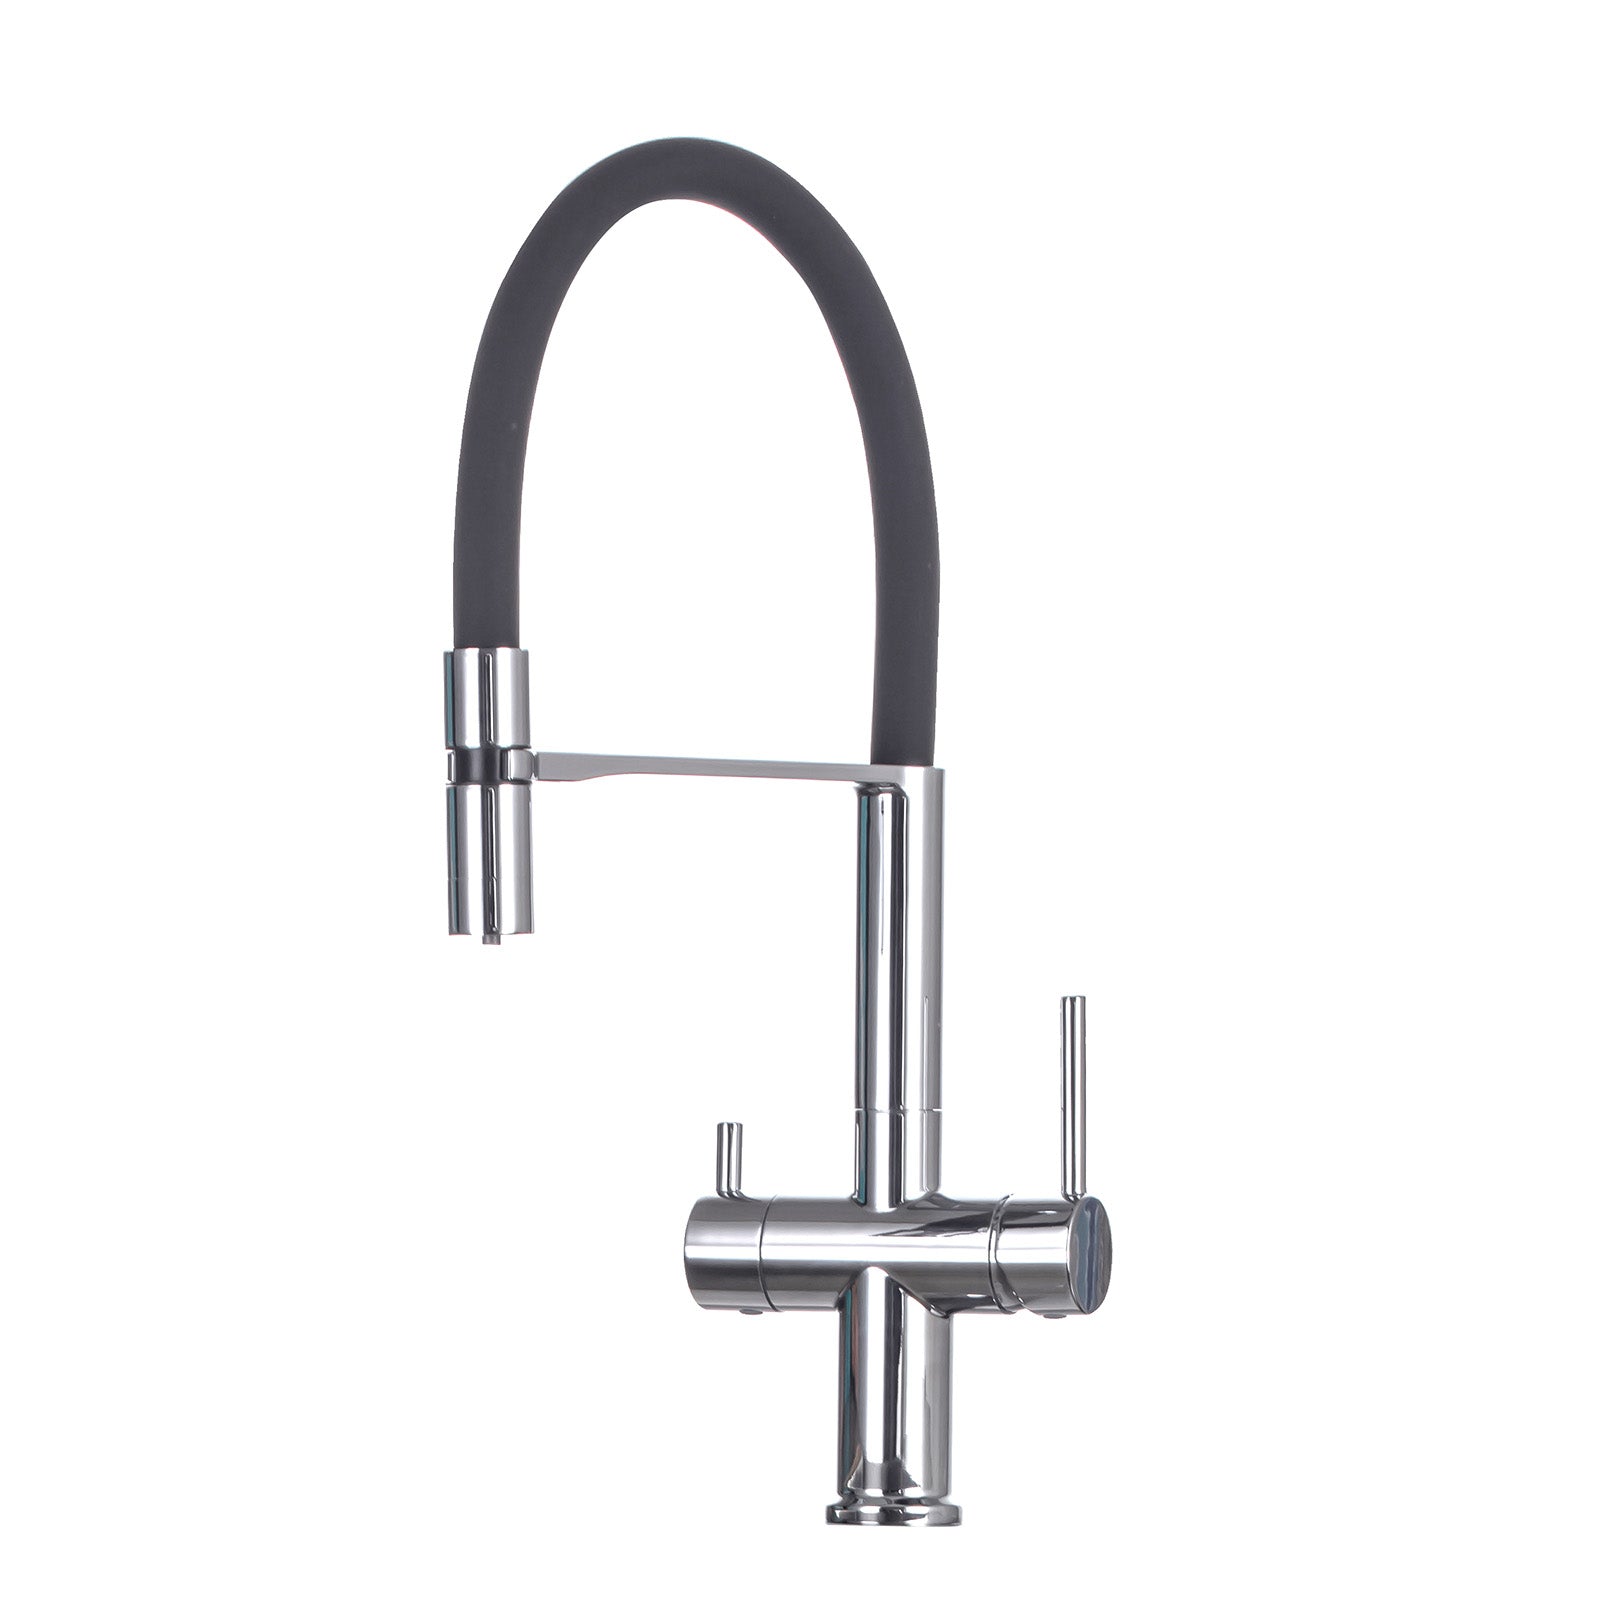 Whitacre Modern Kitchen Sink Mixer Tap With Pull Out 360 Swivel Spout